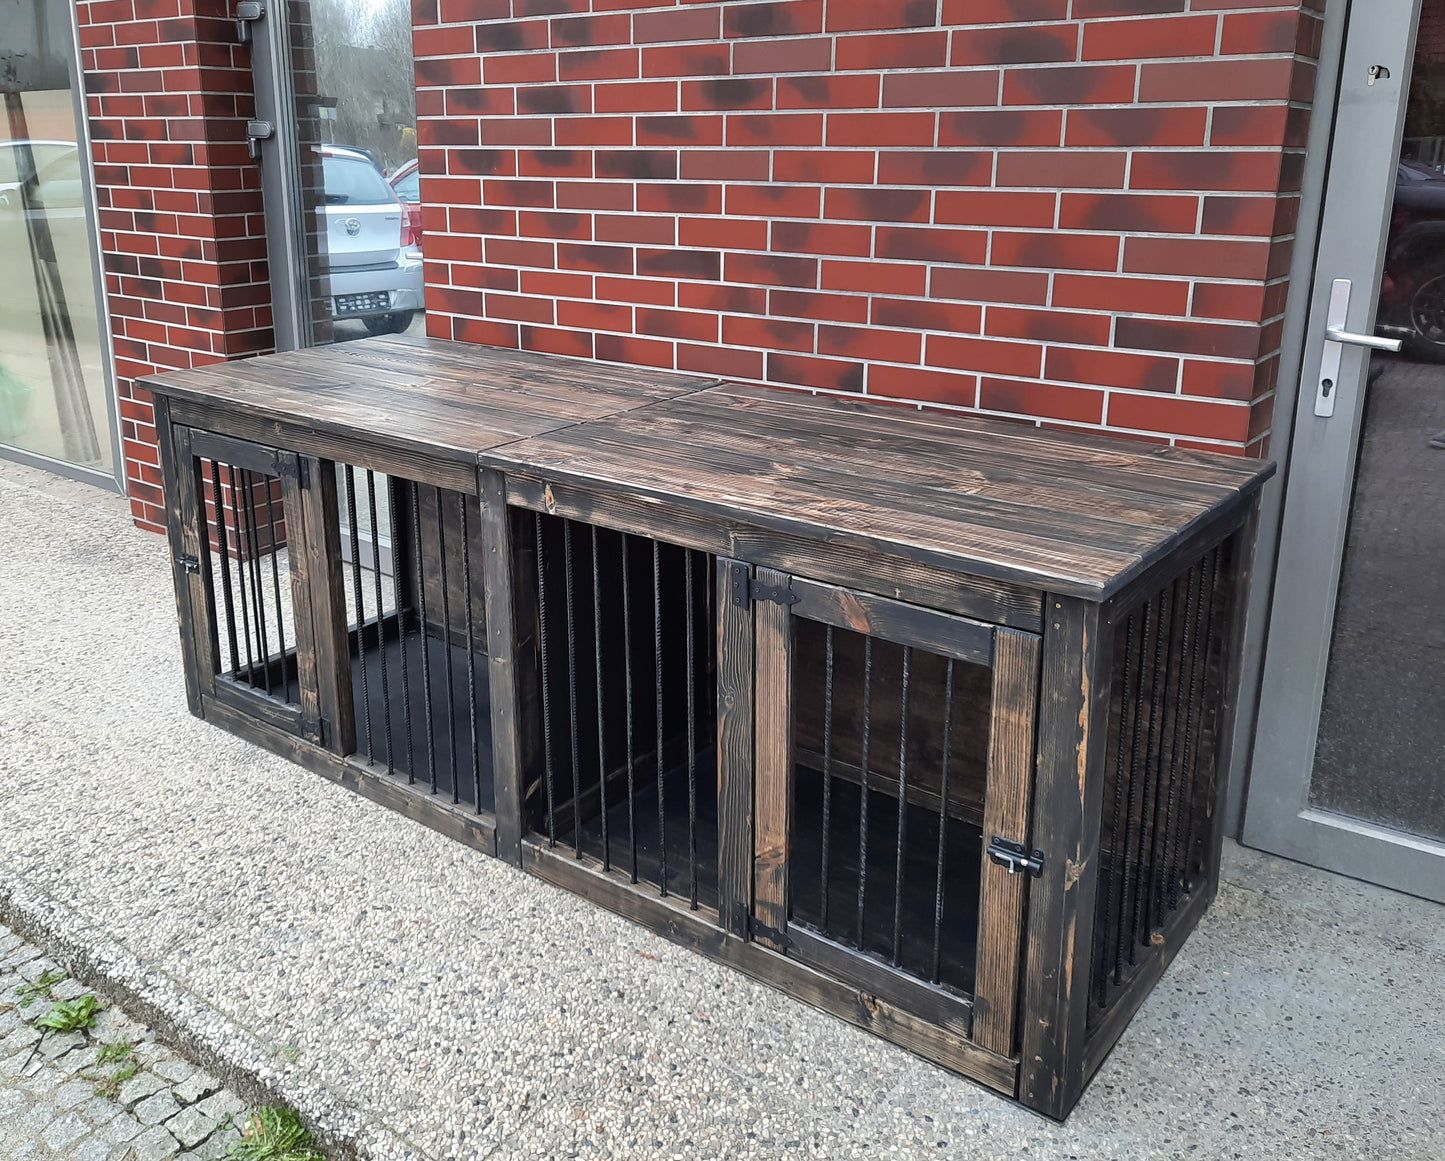 Sturdy and powerful Double industrial style dog house Large dog house in different sizes and colors - WoW WooD